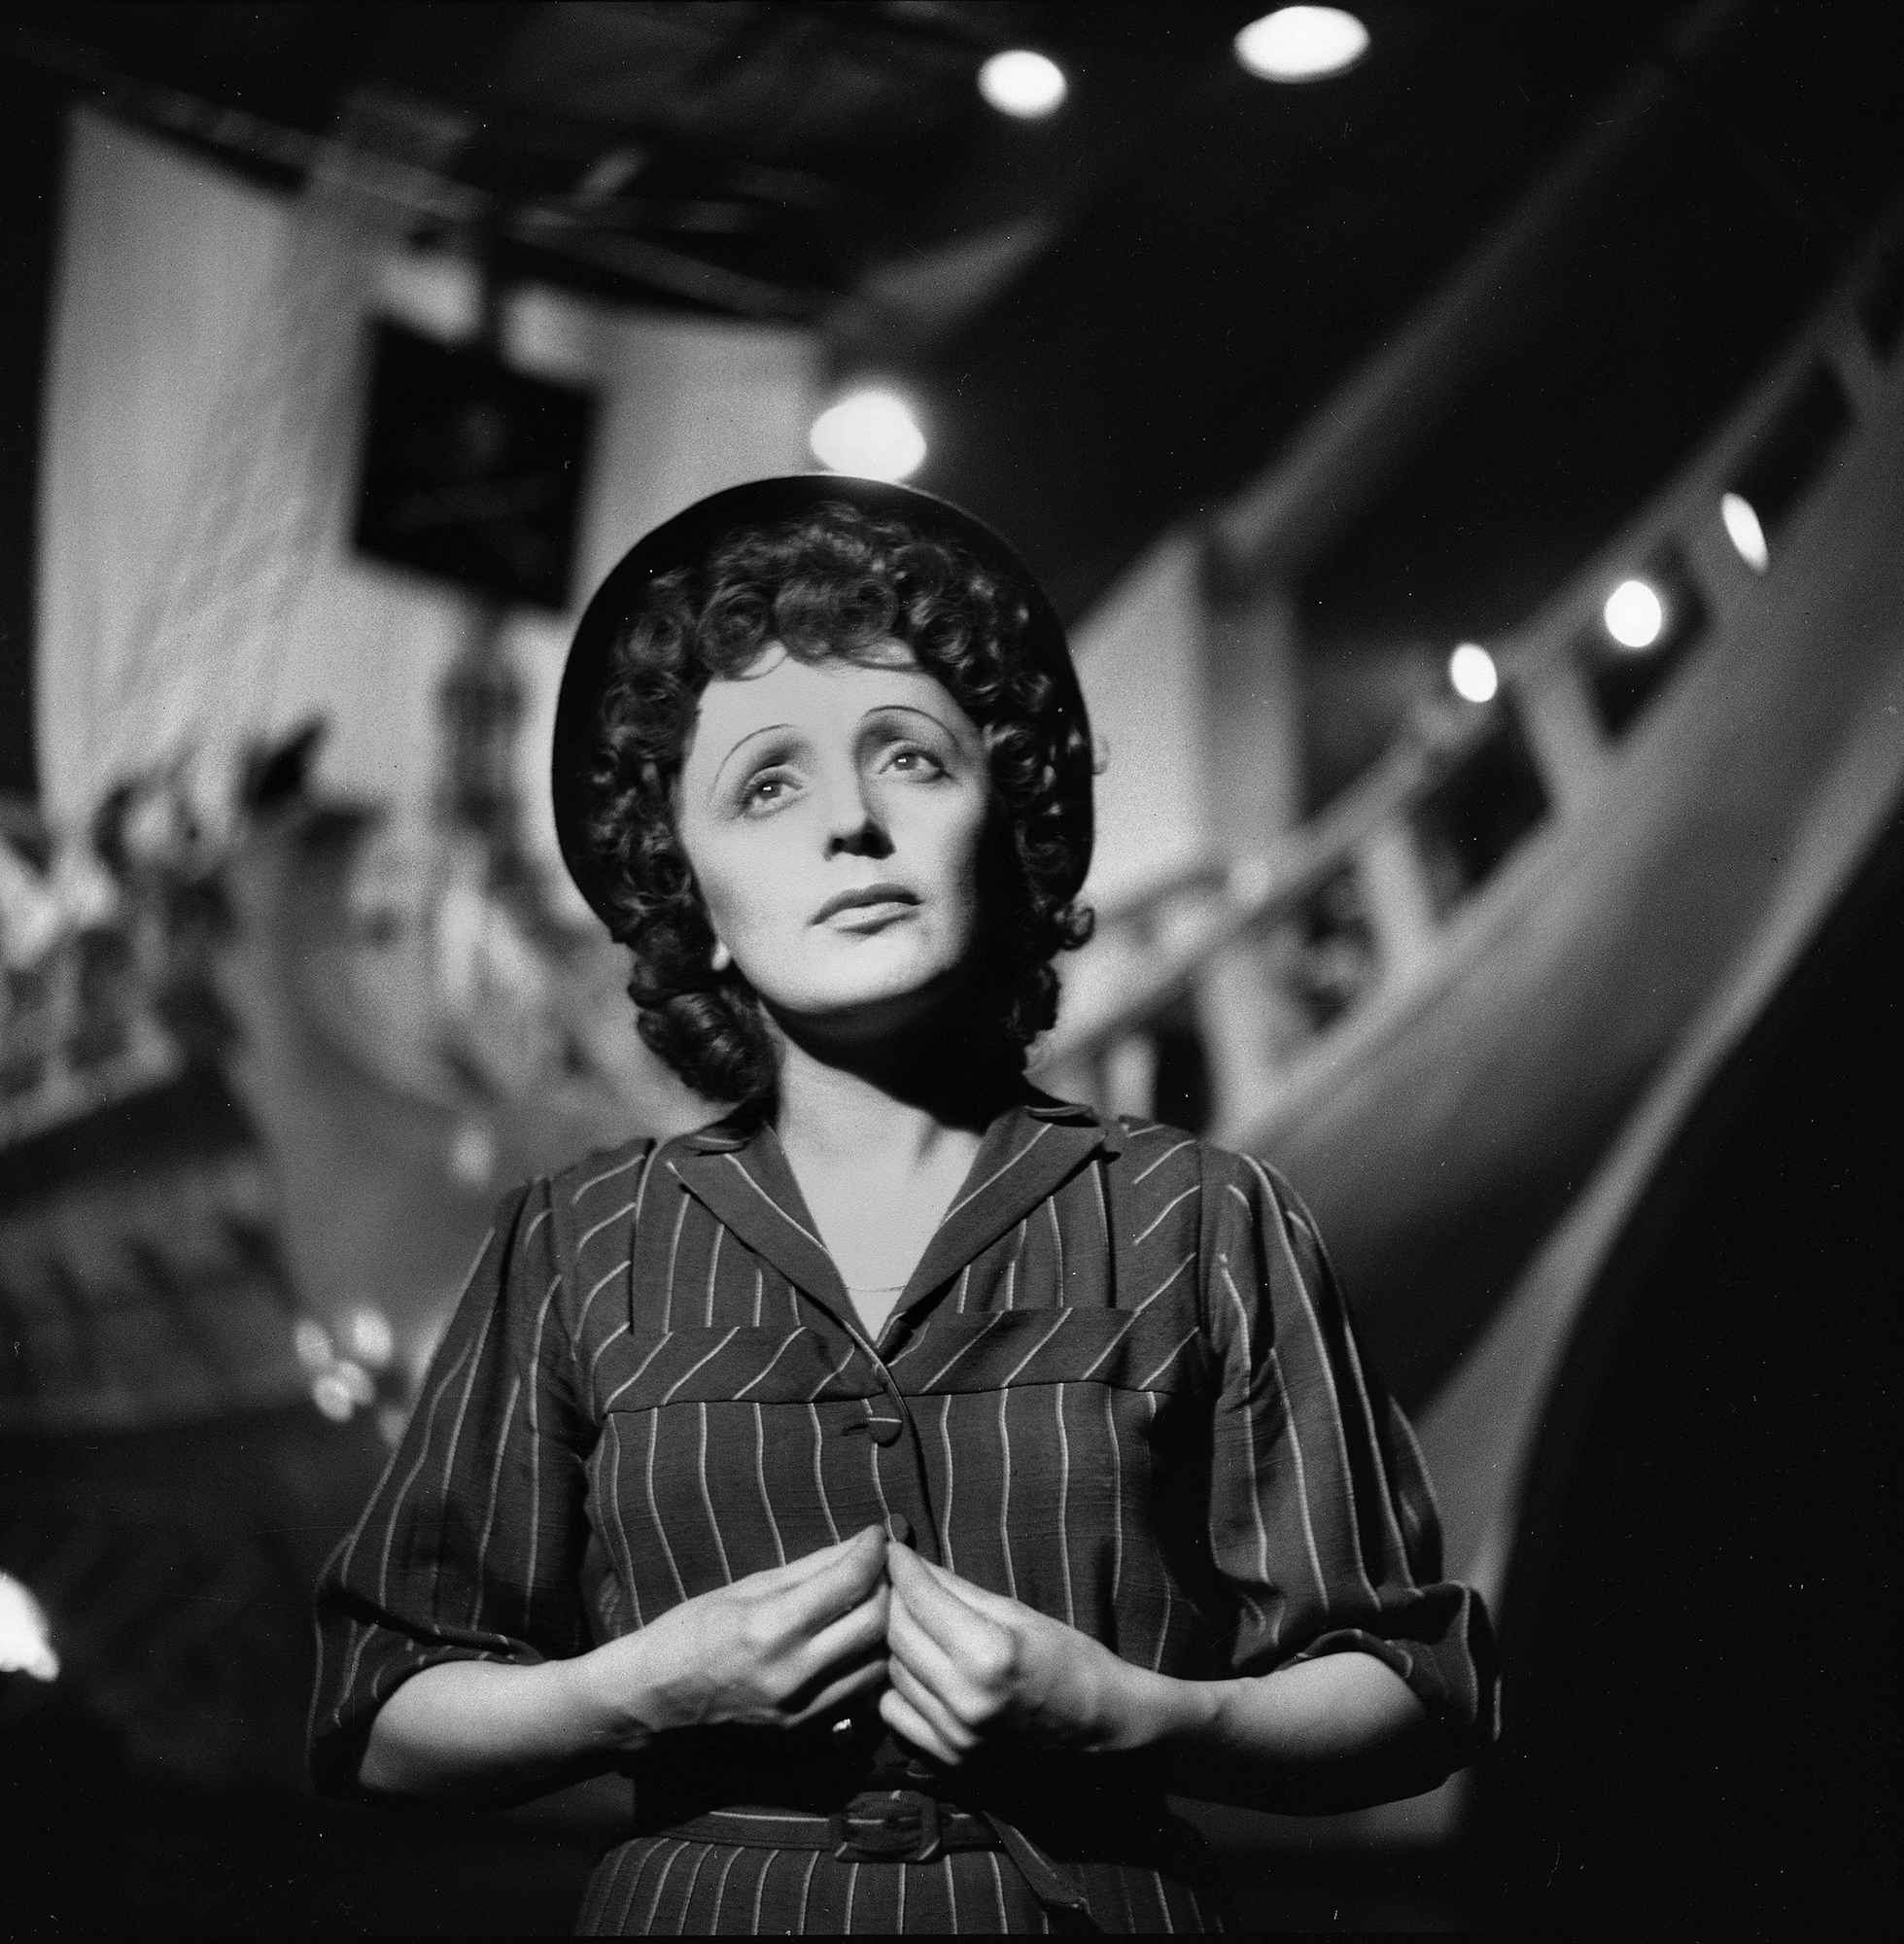 FRANCE - 1950: Edith Piaf (1915-1963), French singer. (Photo by Gaston Paris/Roger Viollet/Getty Images)